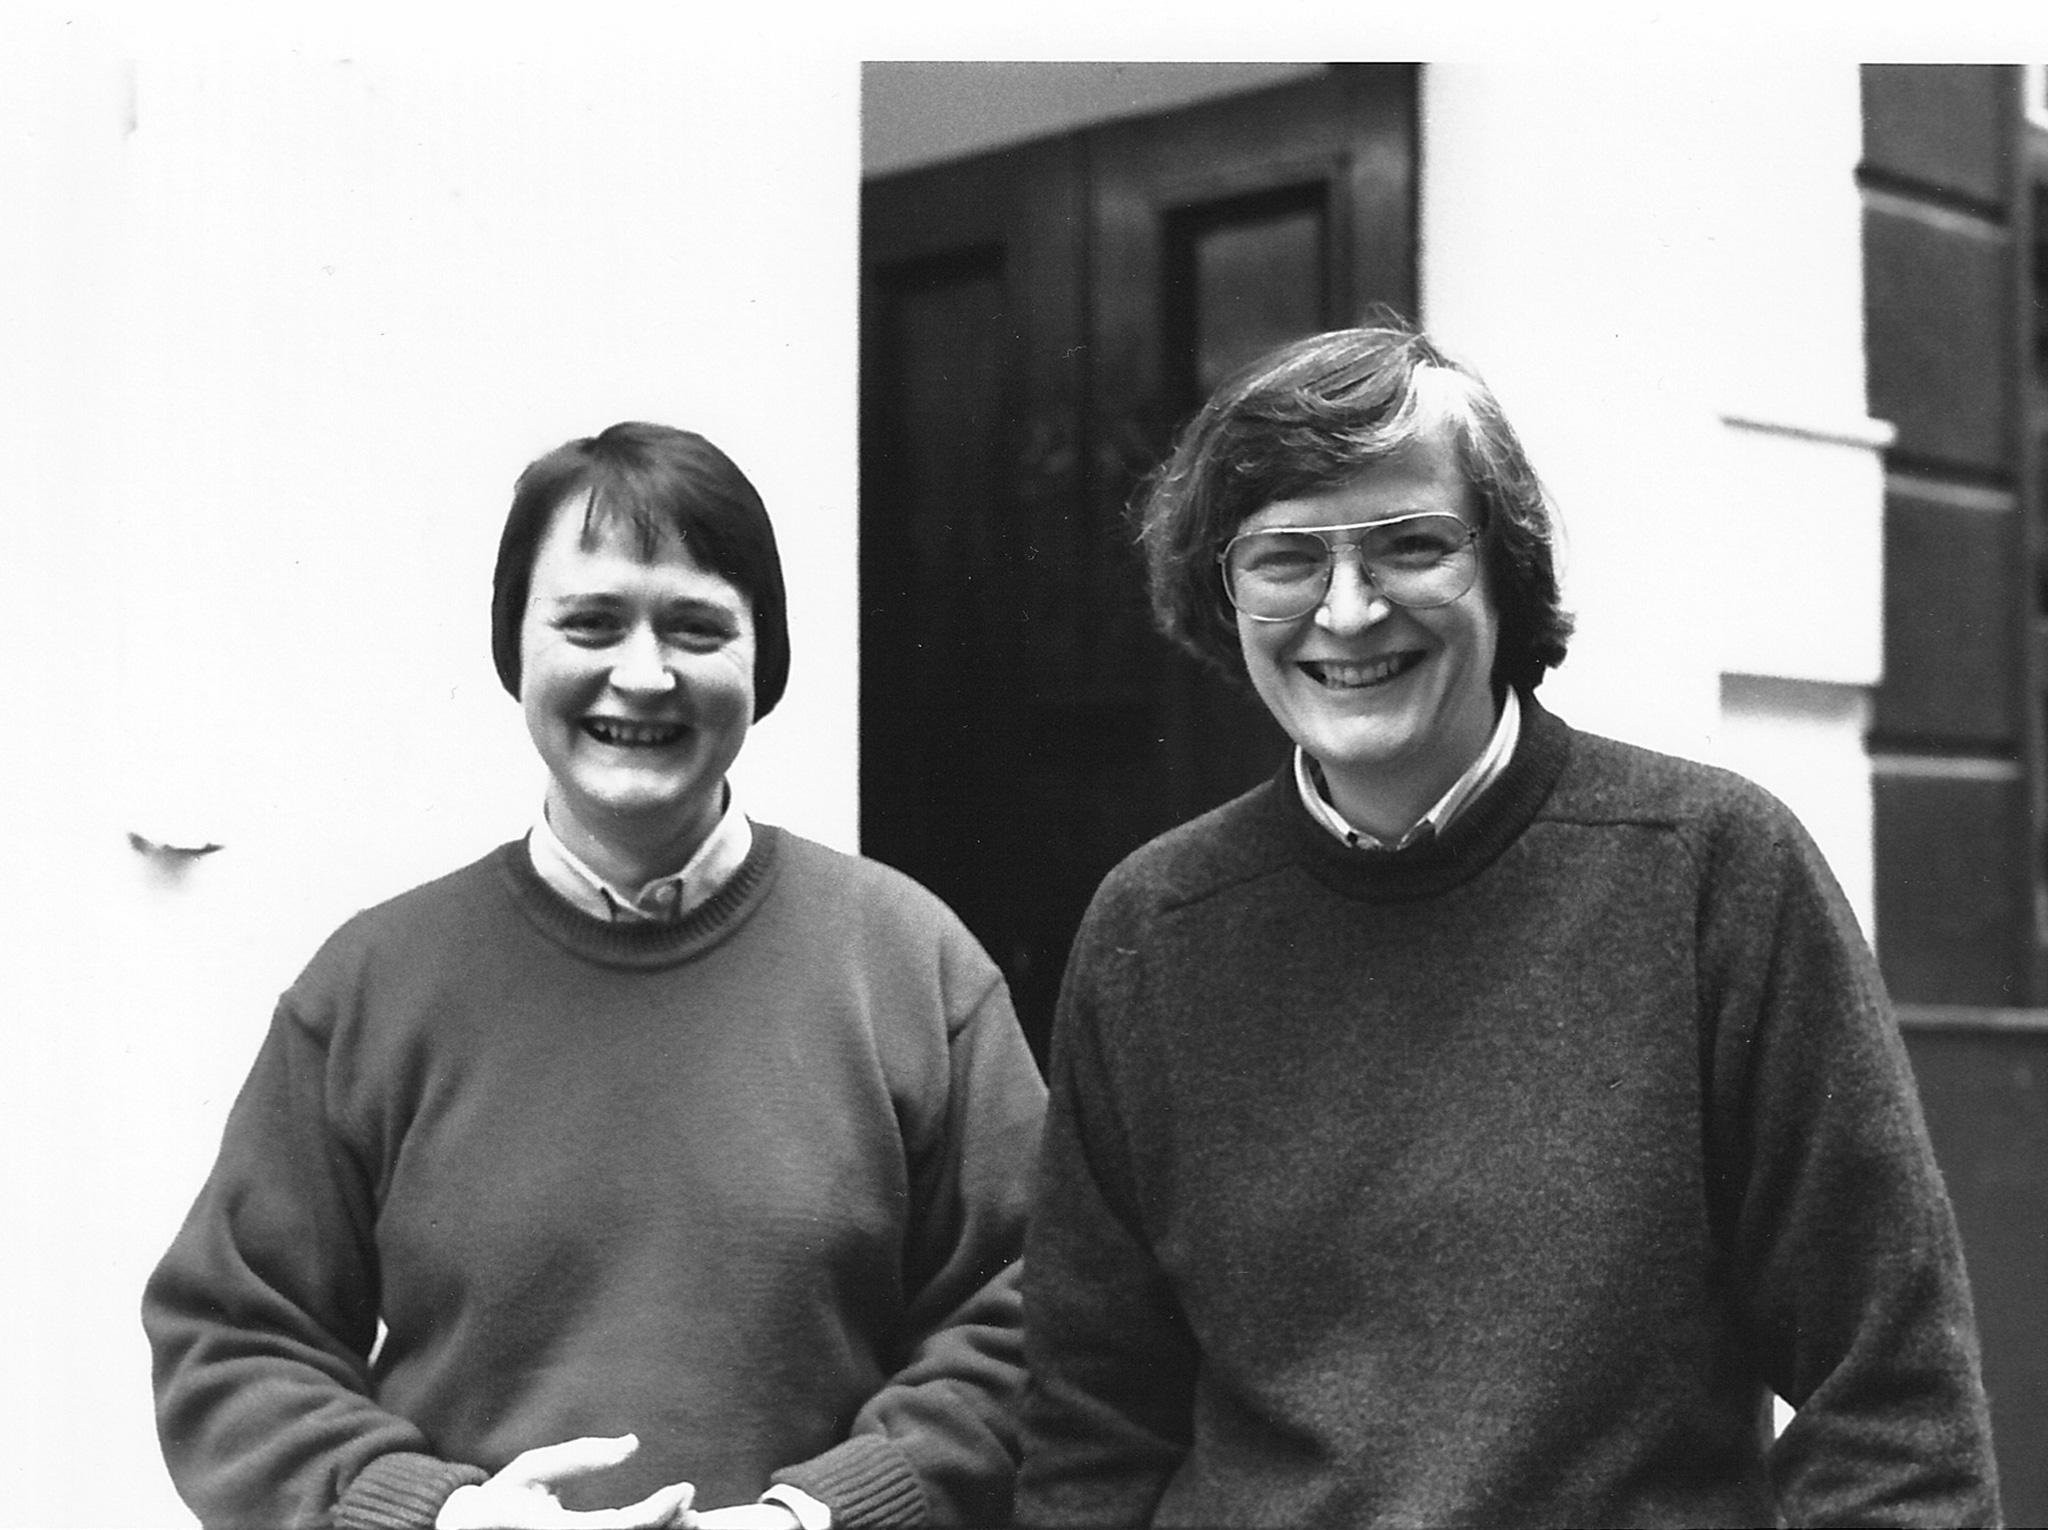 Sue Butterworth and Jane Cholmeley, co-founders of Silver Moon Women’s bookshop